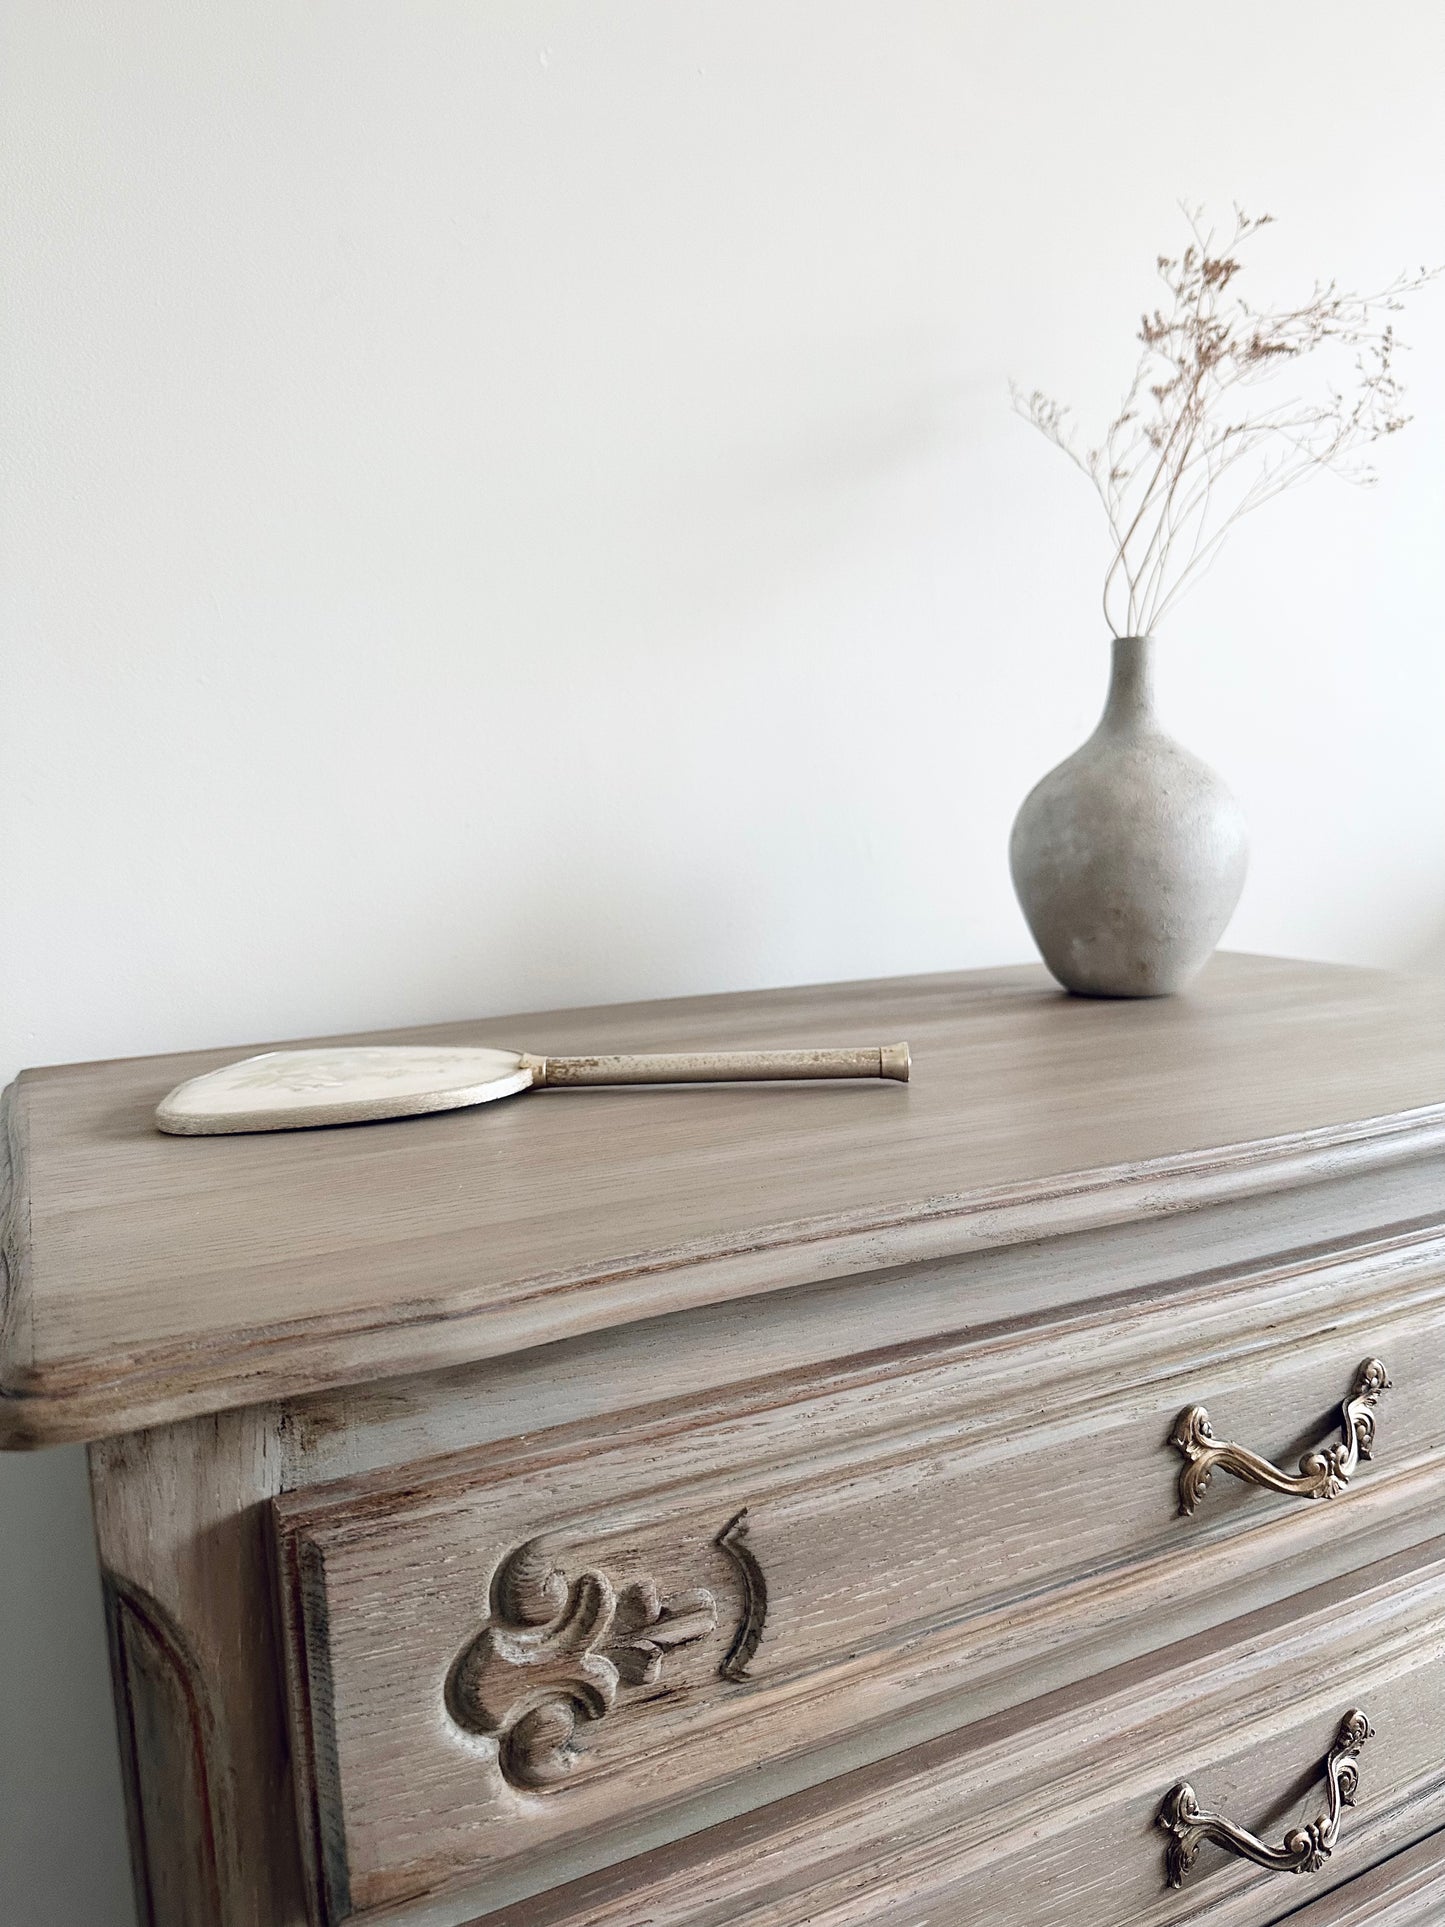 Rustic French Chest of Four Drawers